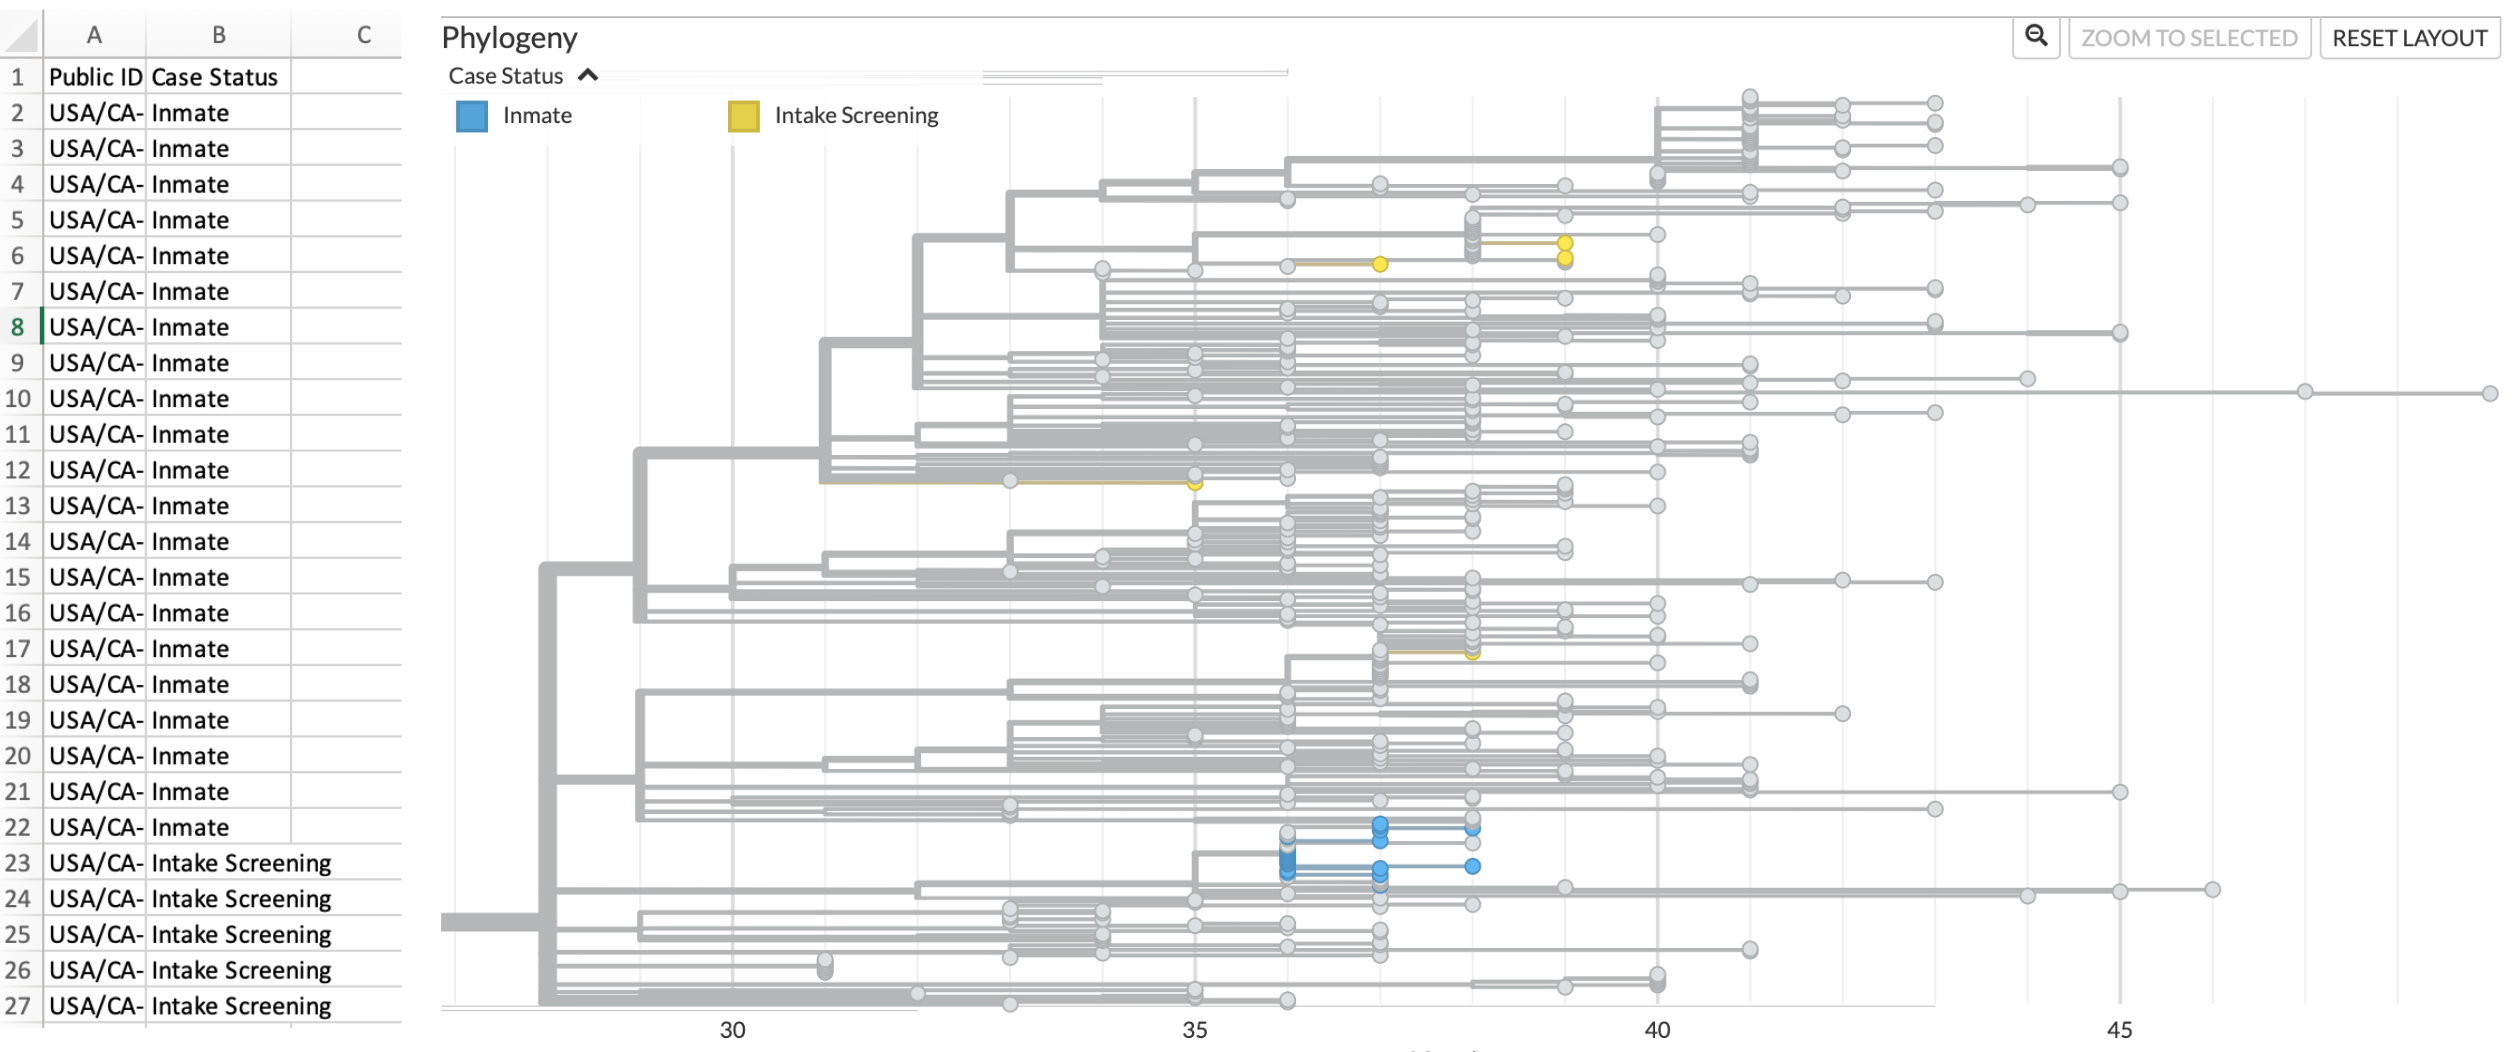 Metadata overlay onto Nextstrain phylogenetic tree differentiates sequences from incarcerated individuals (inmates) and from intake screening. On the left hand side of this figure is a screenshot of the metadata file formatted such that it can be dragged and dropped onto the tree. On the right, we see the same cluster as shown in Figure 6.5, but now jail sequences are coloured according to whether they were sampled from incarcerated individuals residing in pods (blue) or from individuals undergoing intake screening (yellow). Contextual sequences remain coloured in grey.